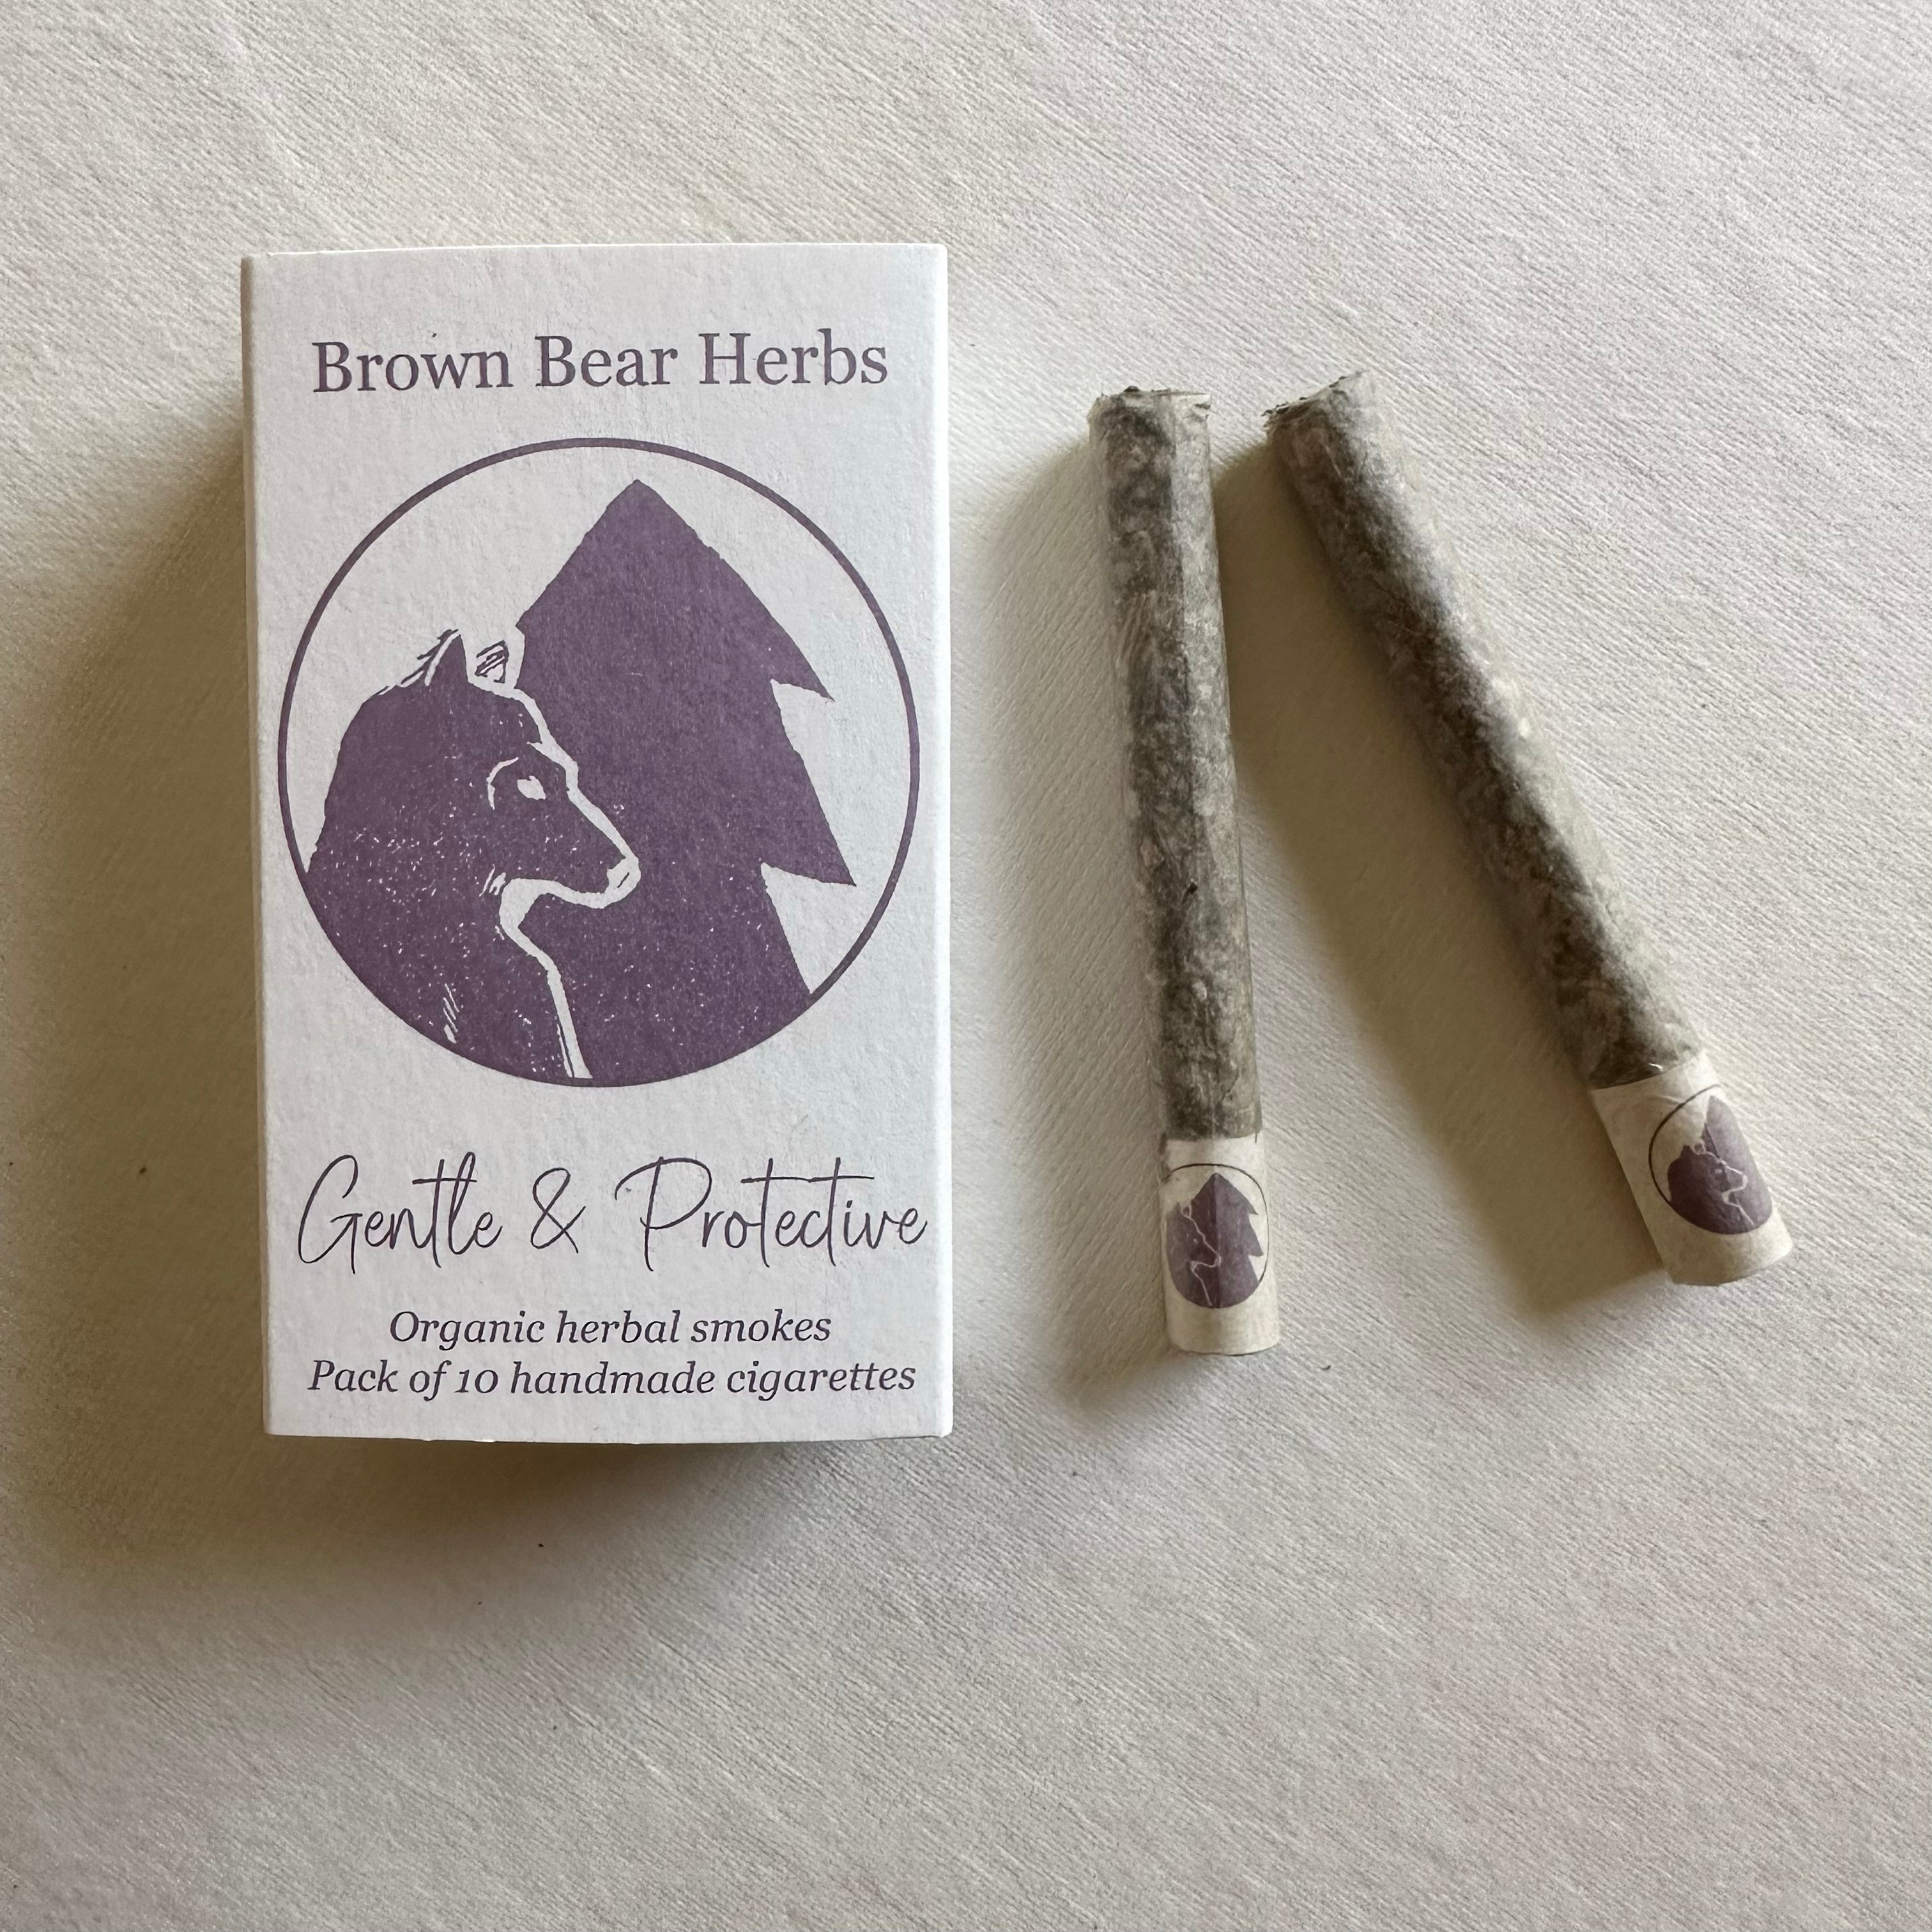 Gentle and Protective Classic Herbal Cigarettes